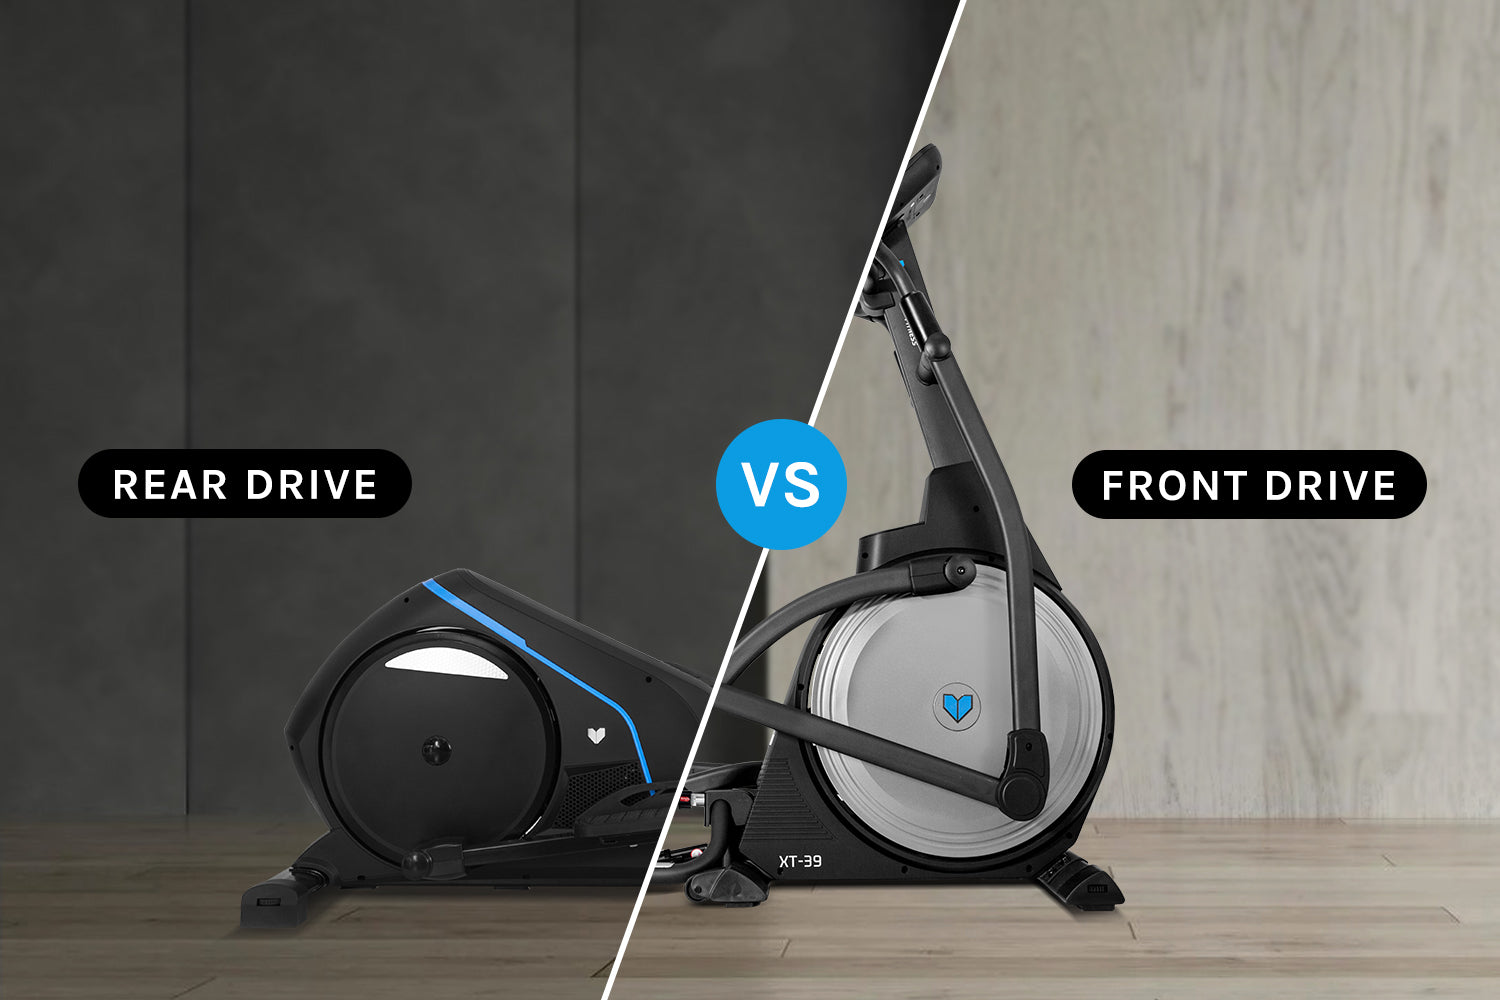 Front Drive vs Rear Drive. What is the difference?